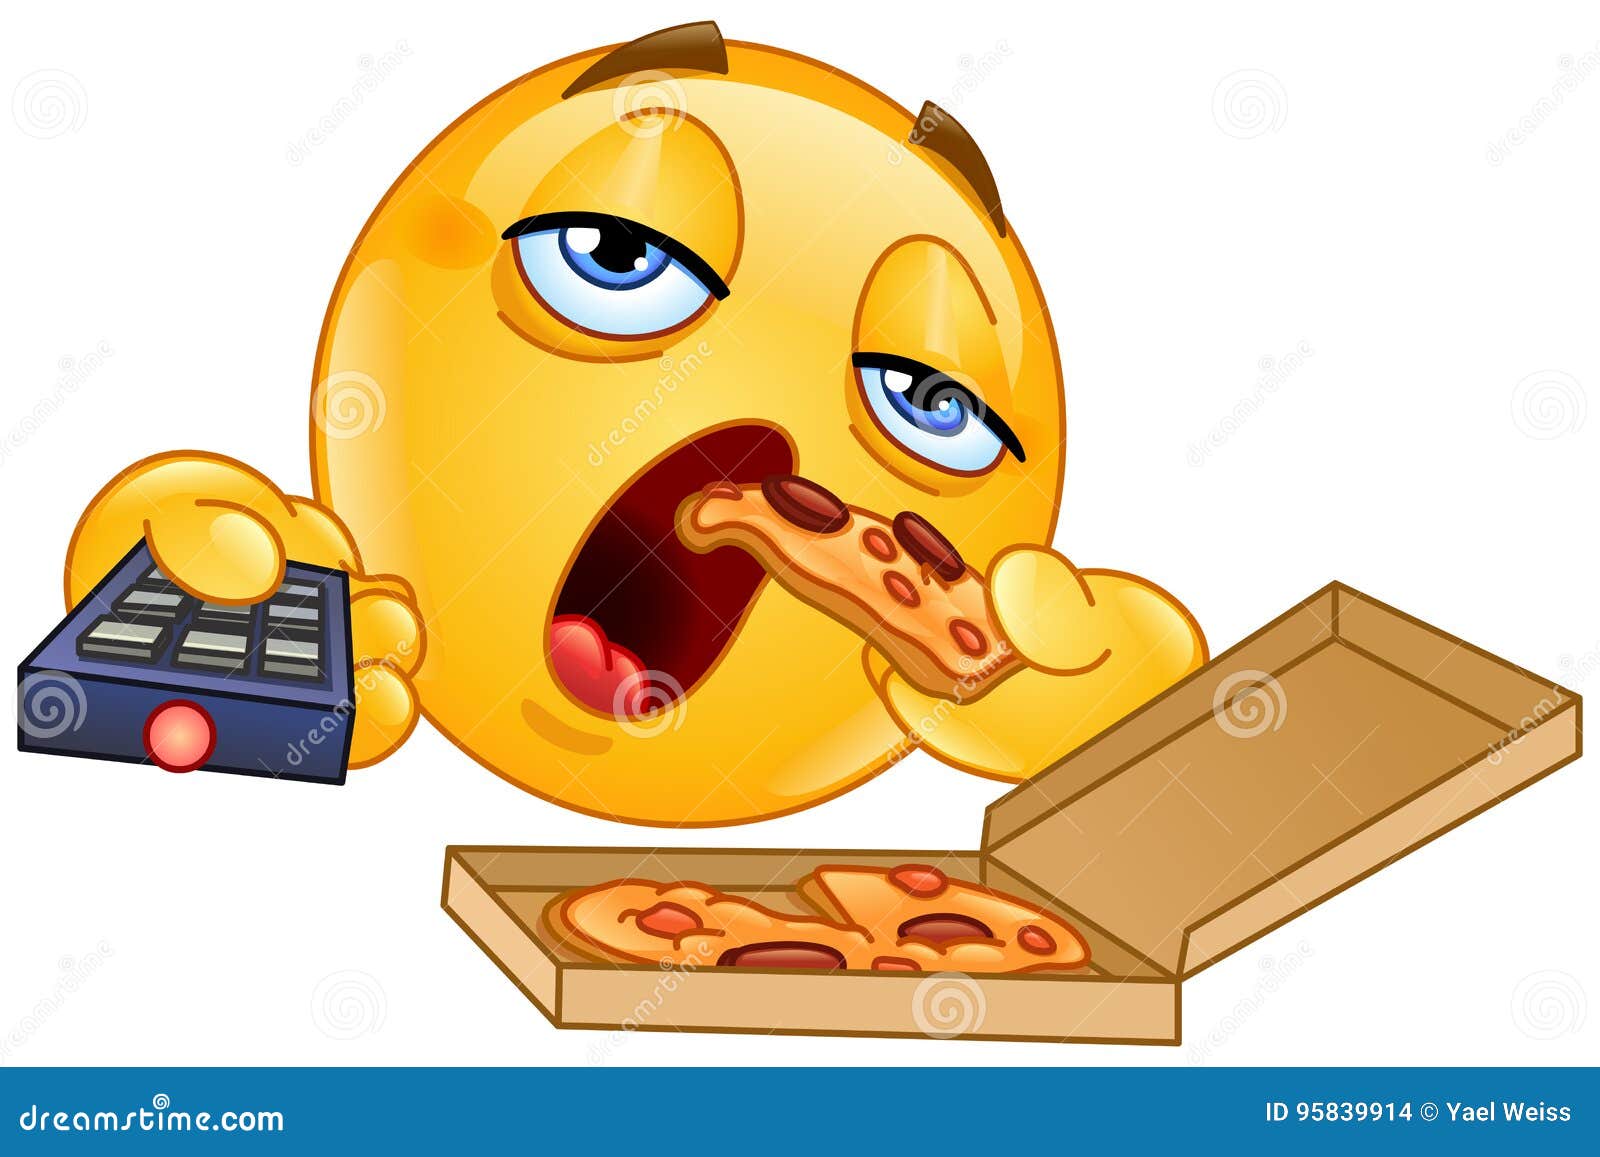 couch-potato-emoticon-slob-watching-tv-eating-pizza-95839914.jpg